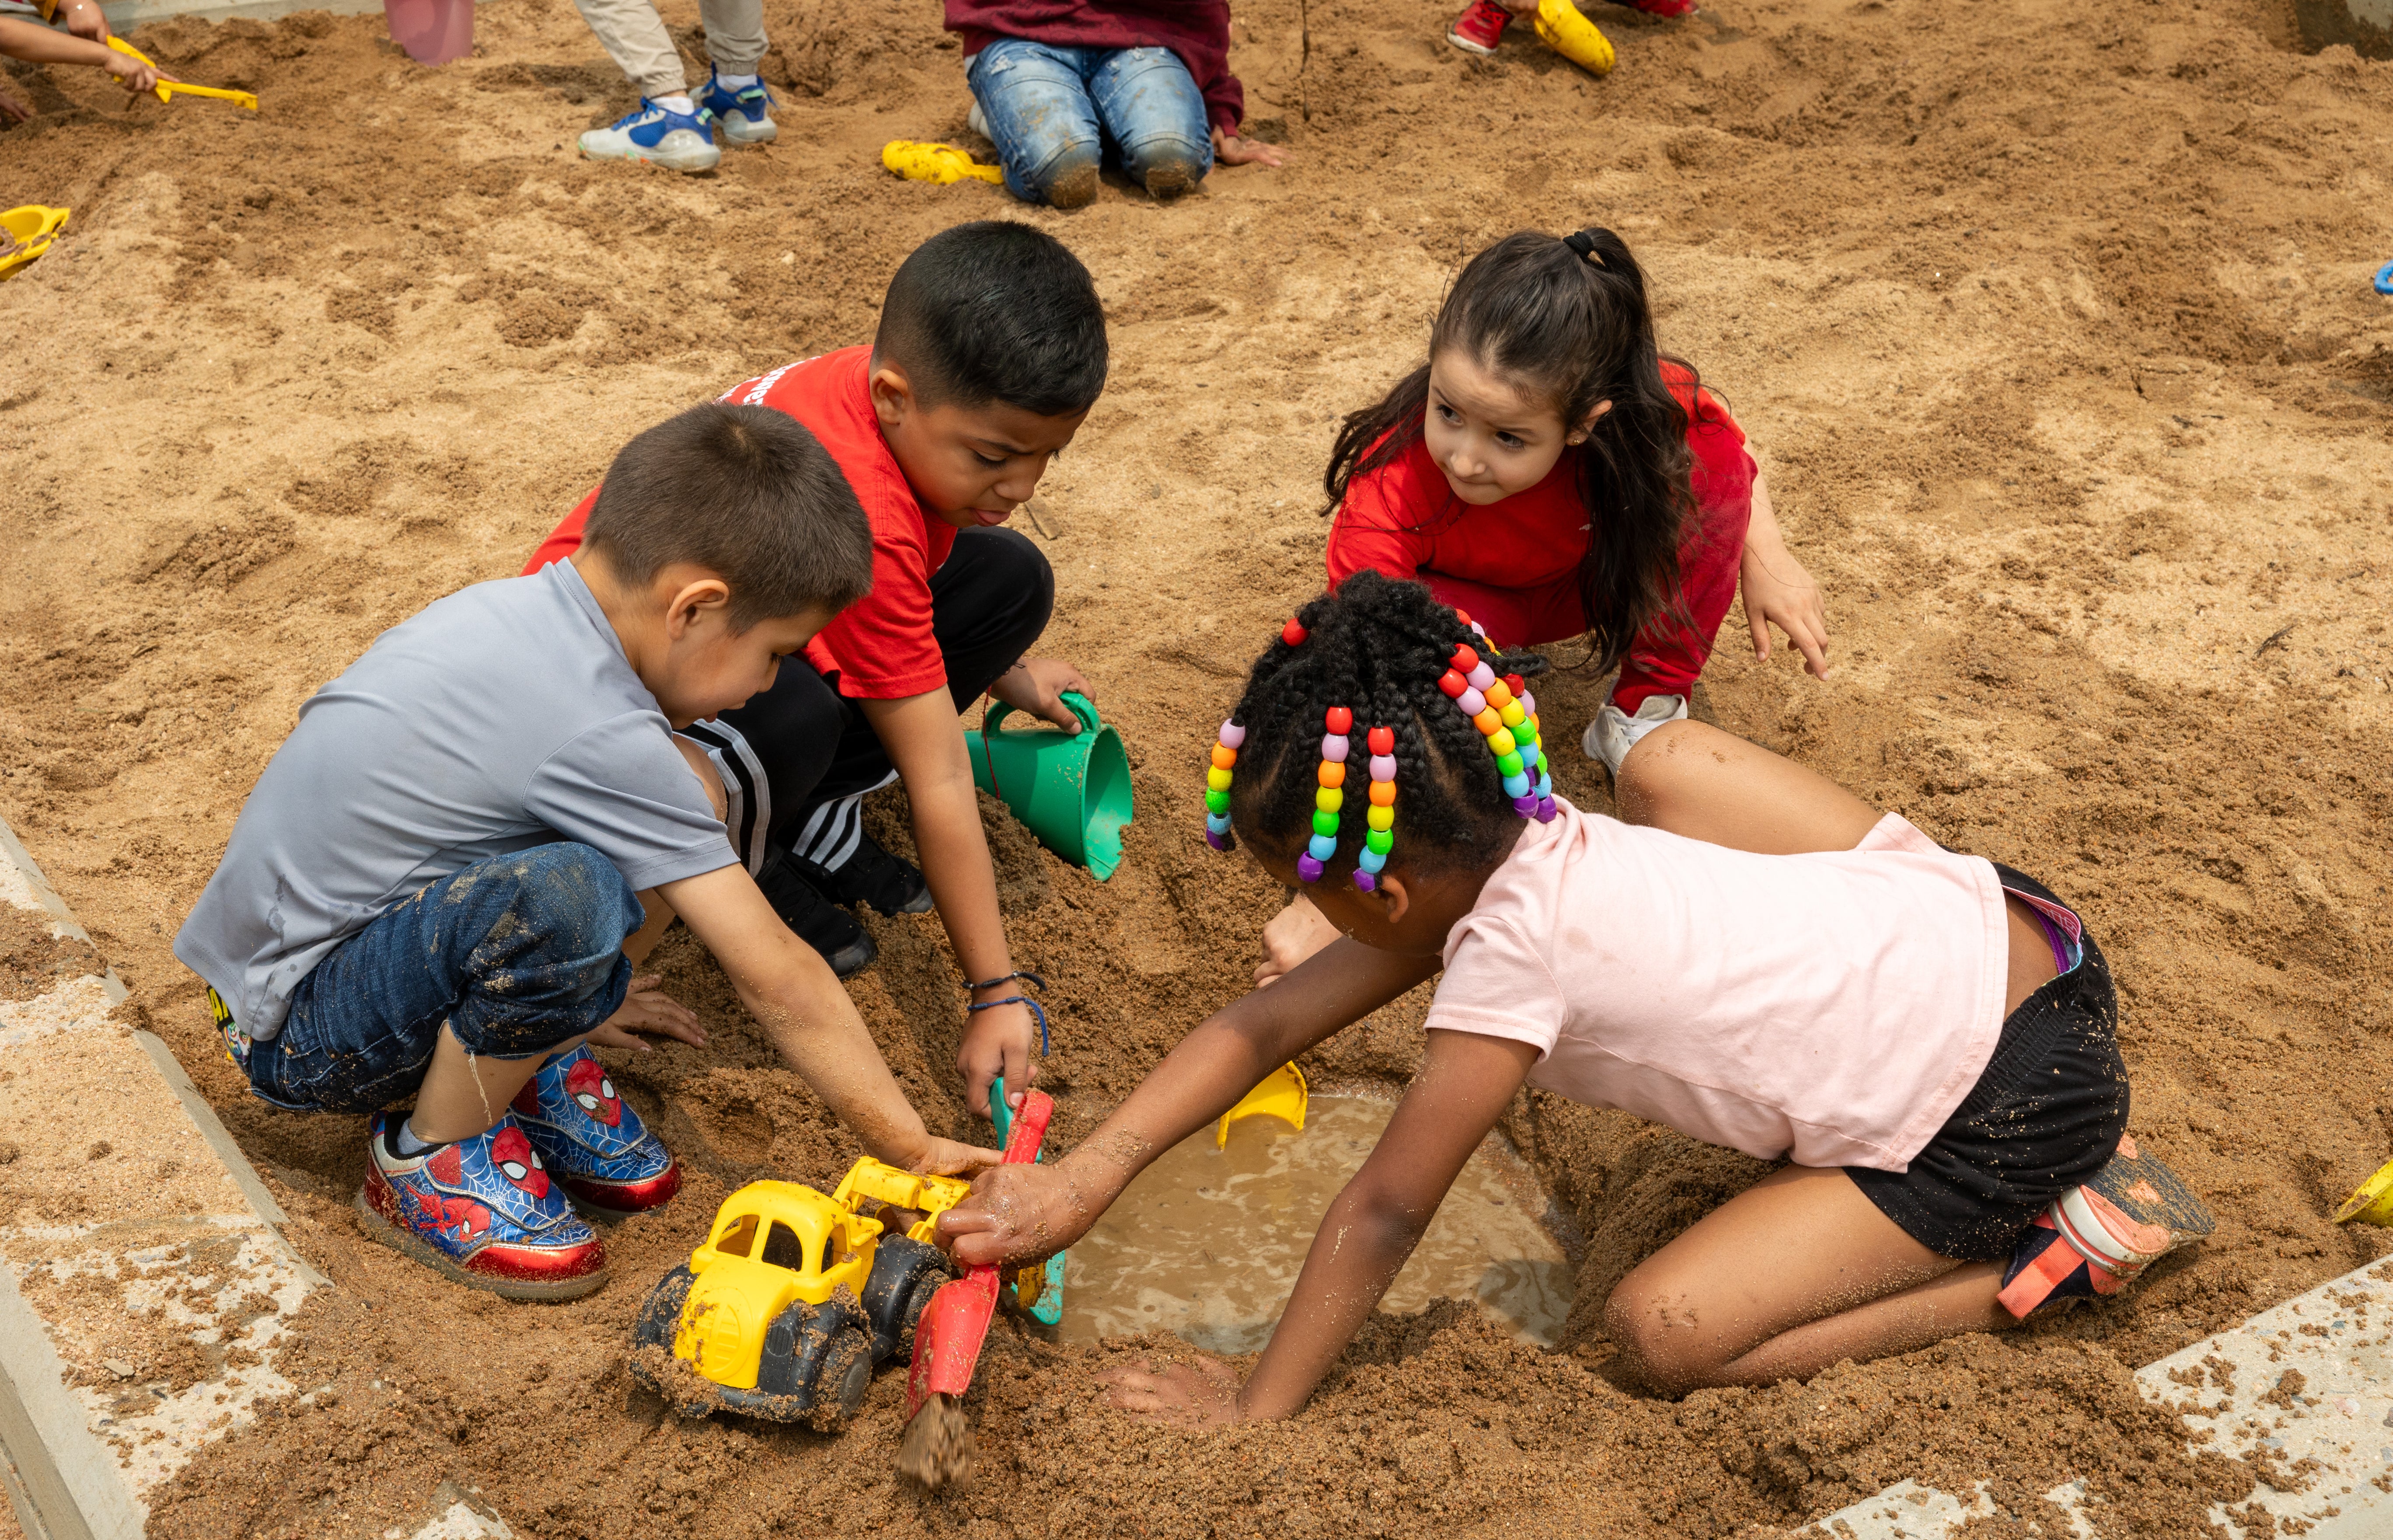 Children in a sand pit play with toys.